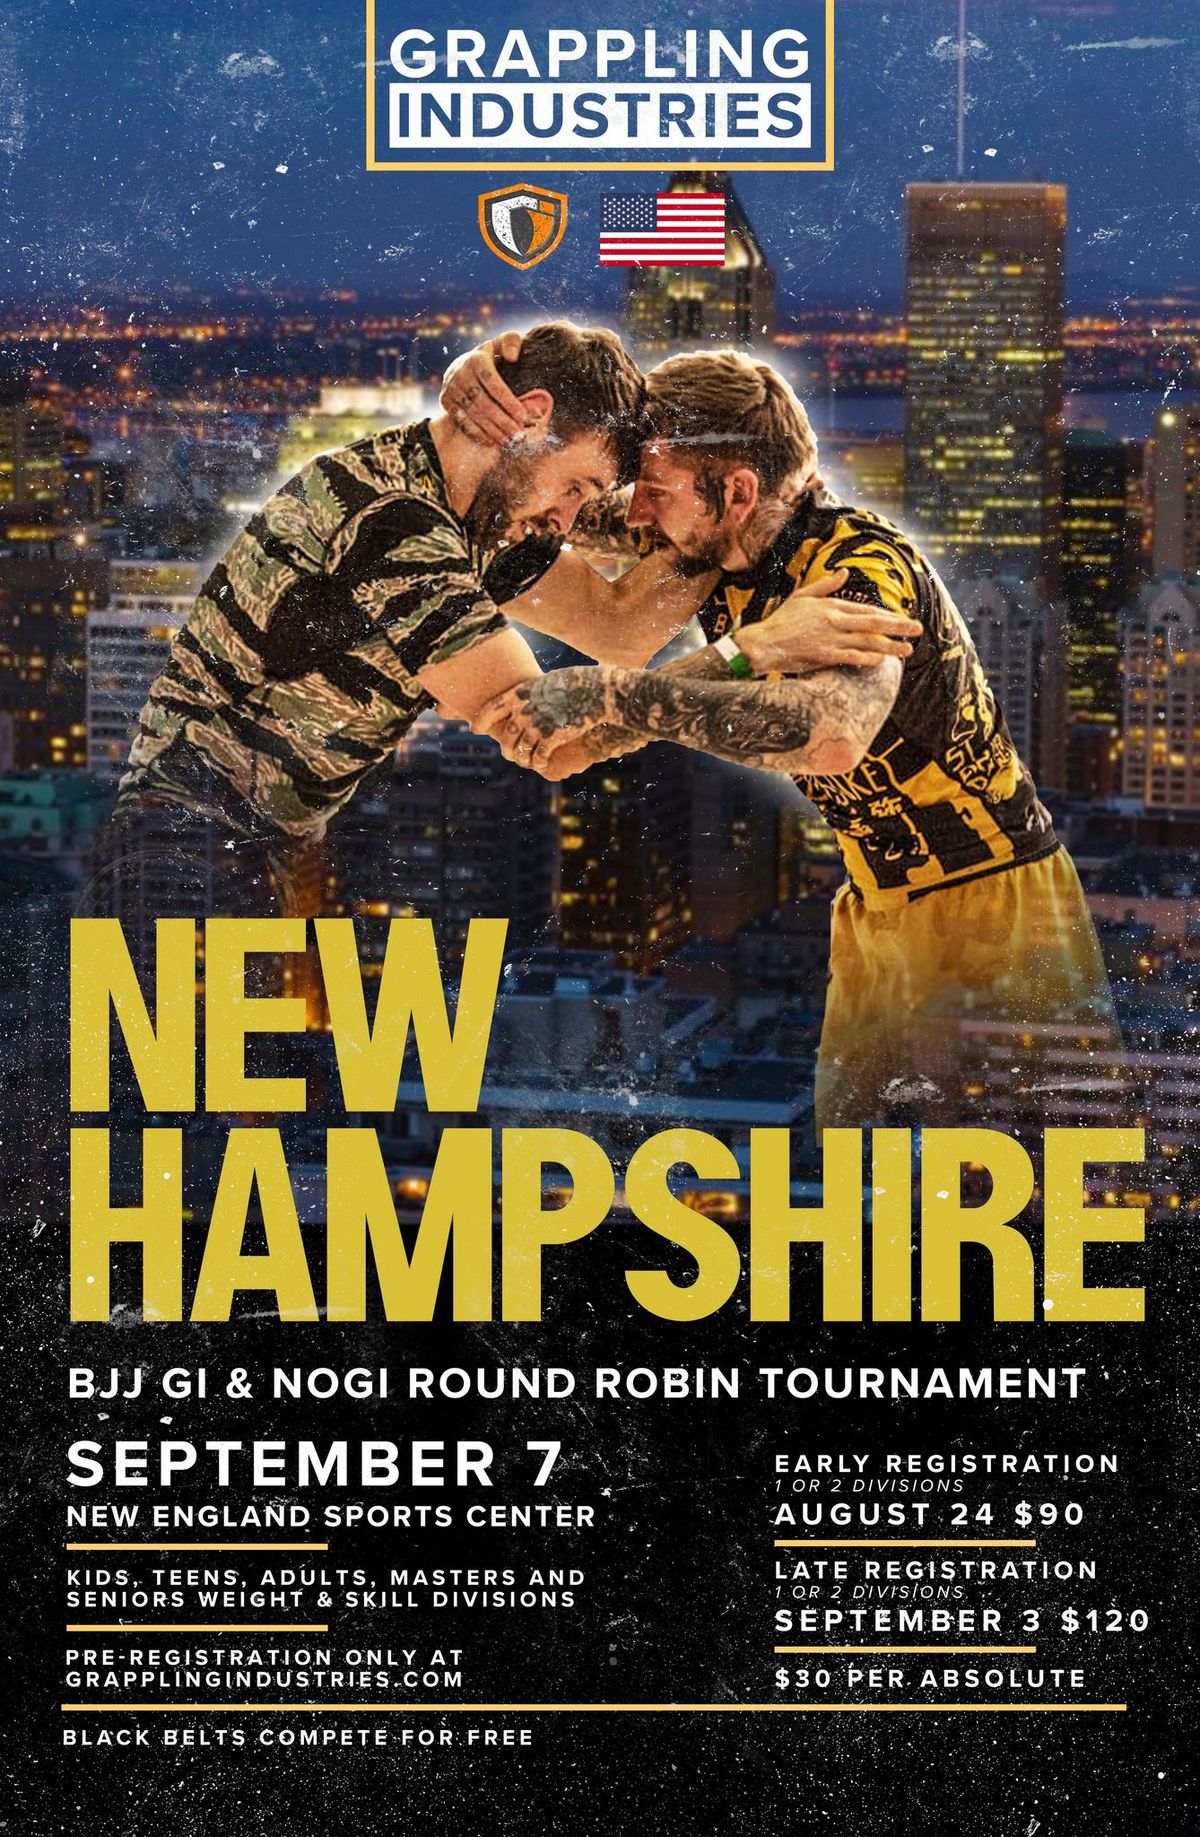 Grappling Industries New Hampshire